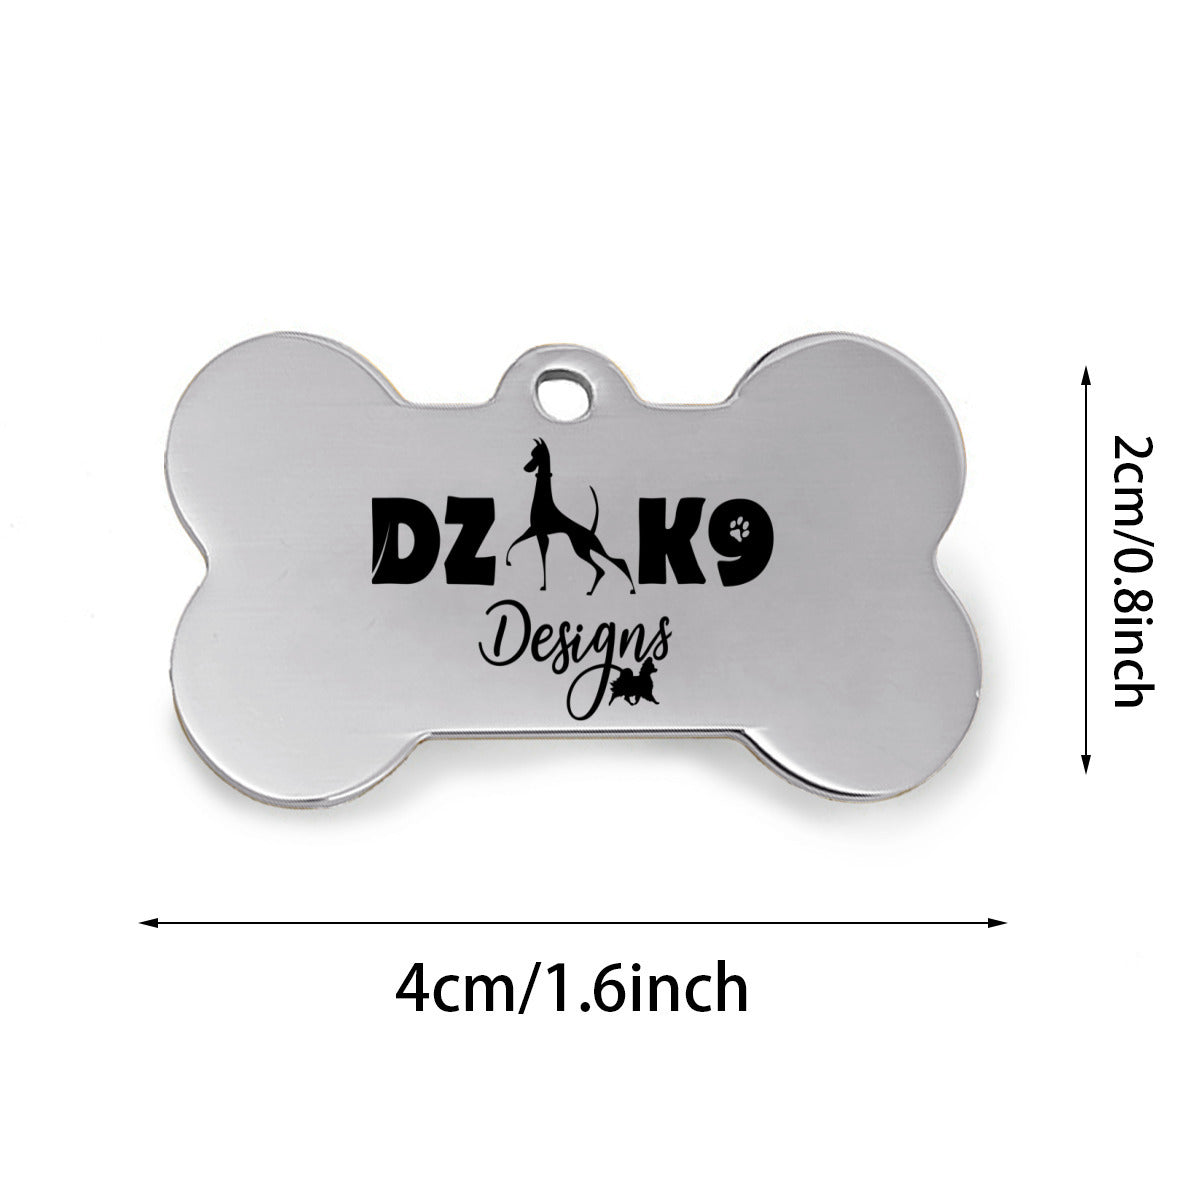 DZK9 TAG